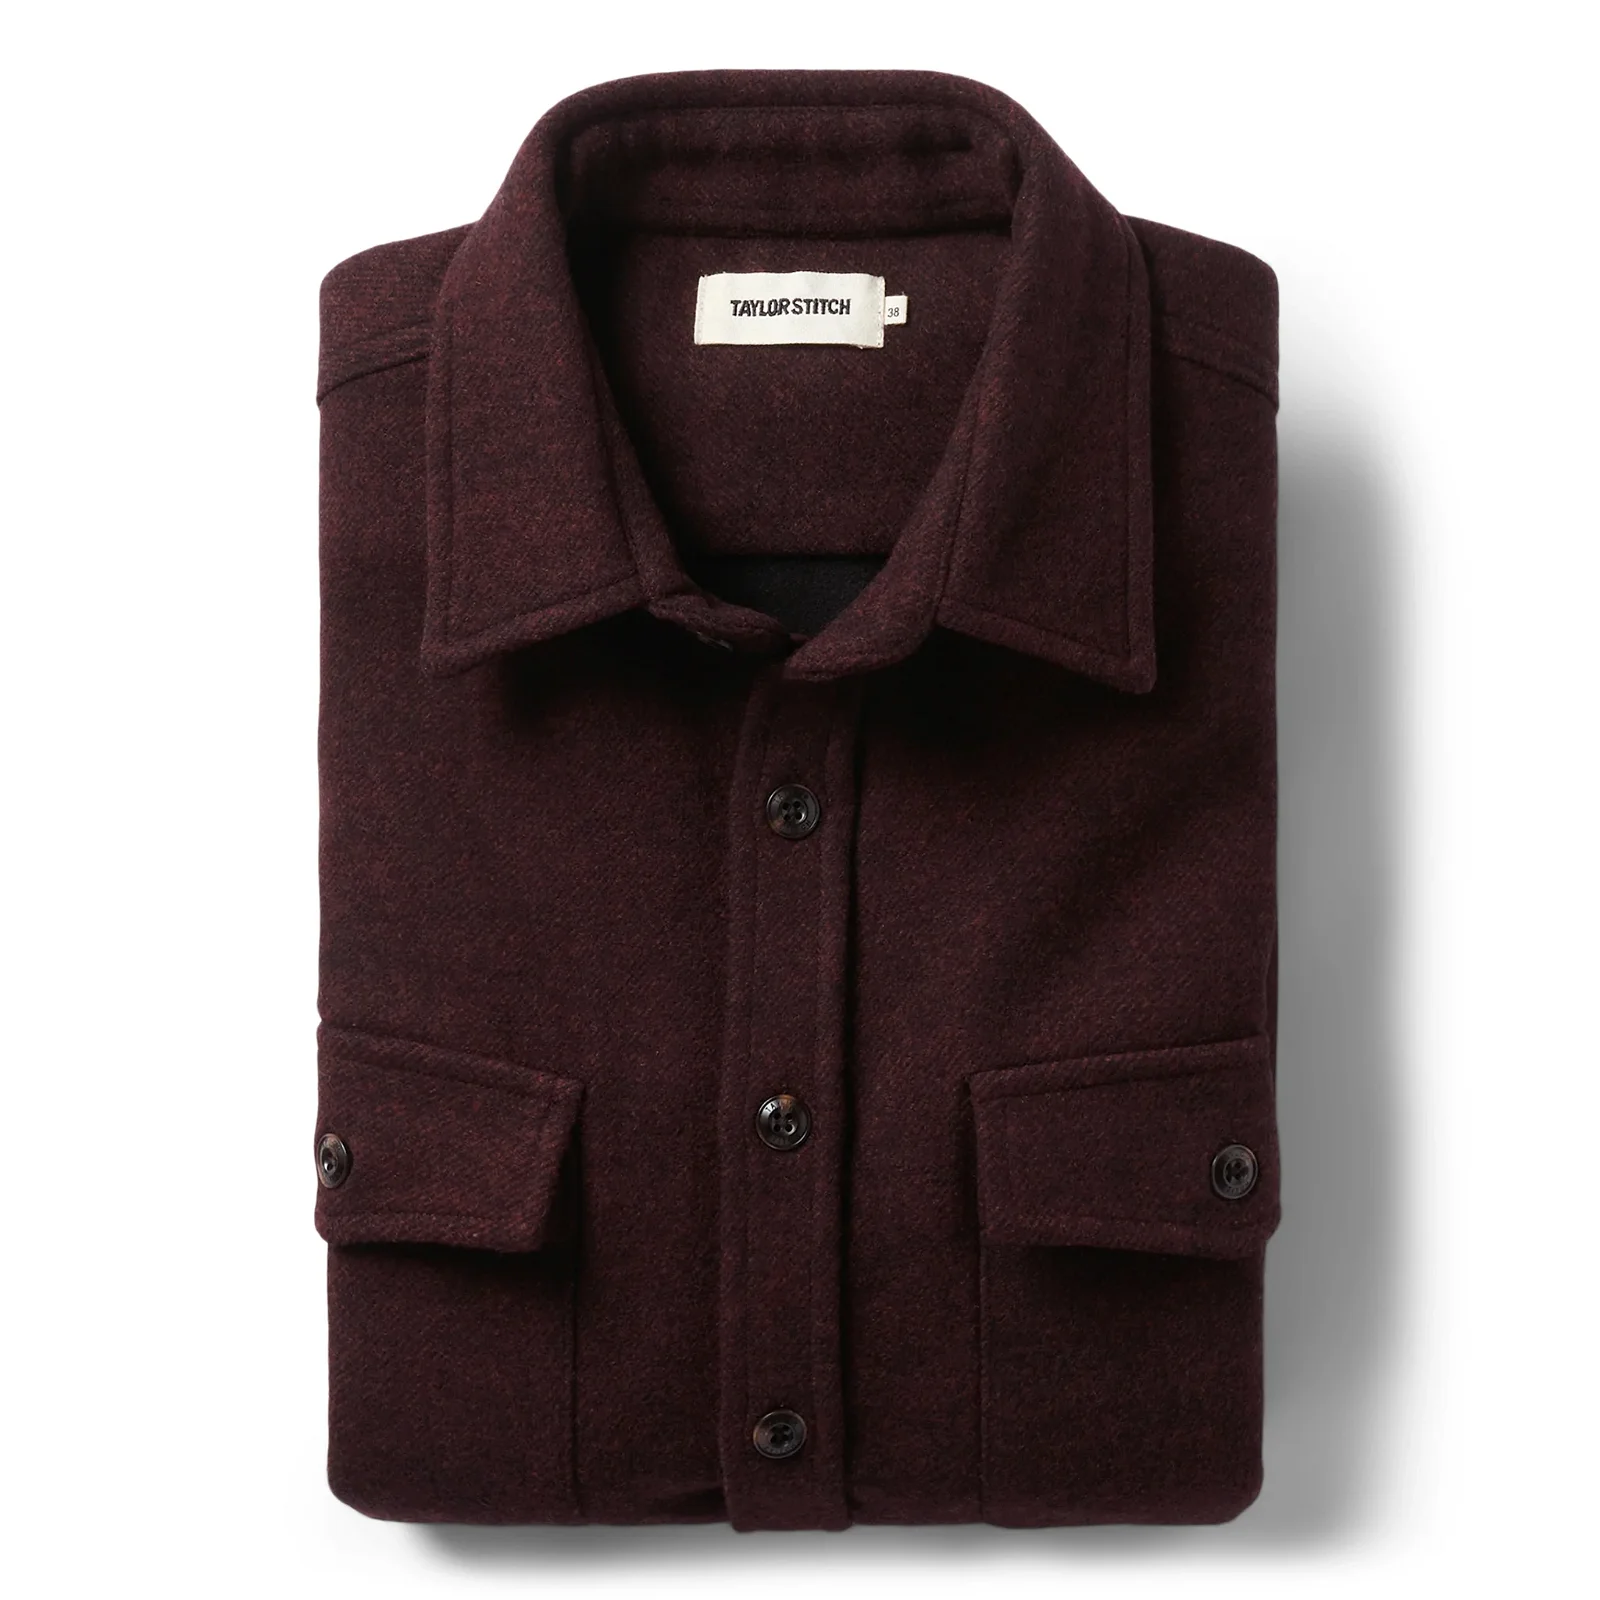 Image of The Maritime Shirt Jacket in Port Twill